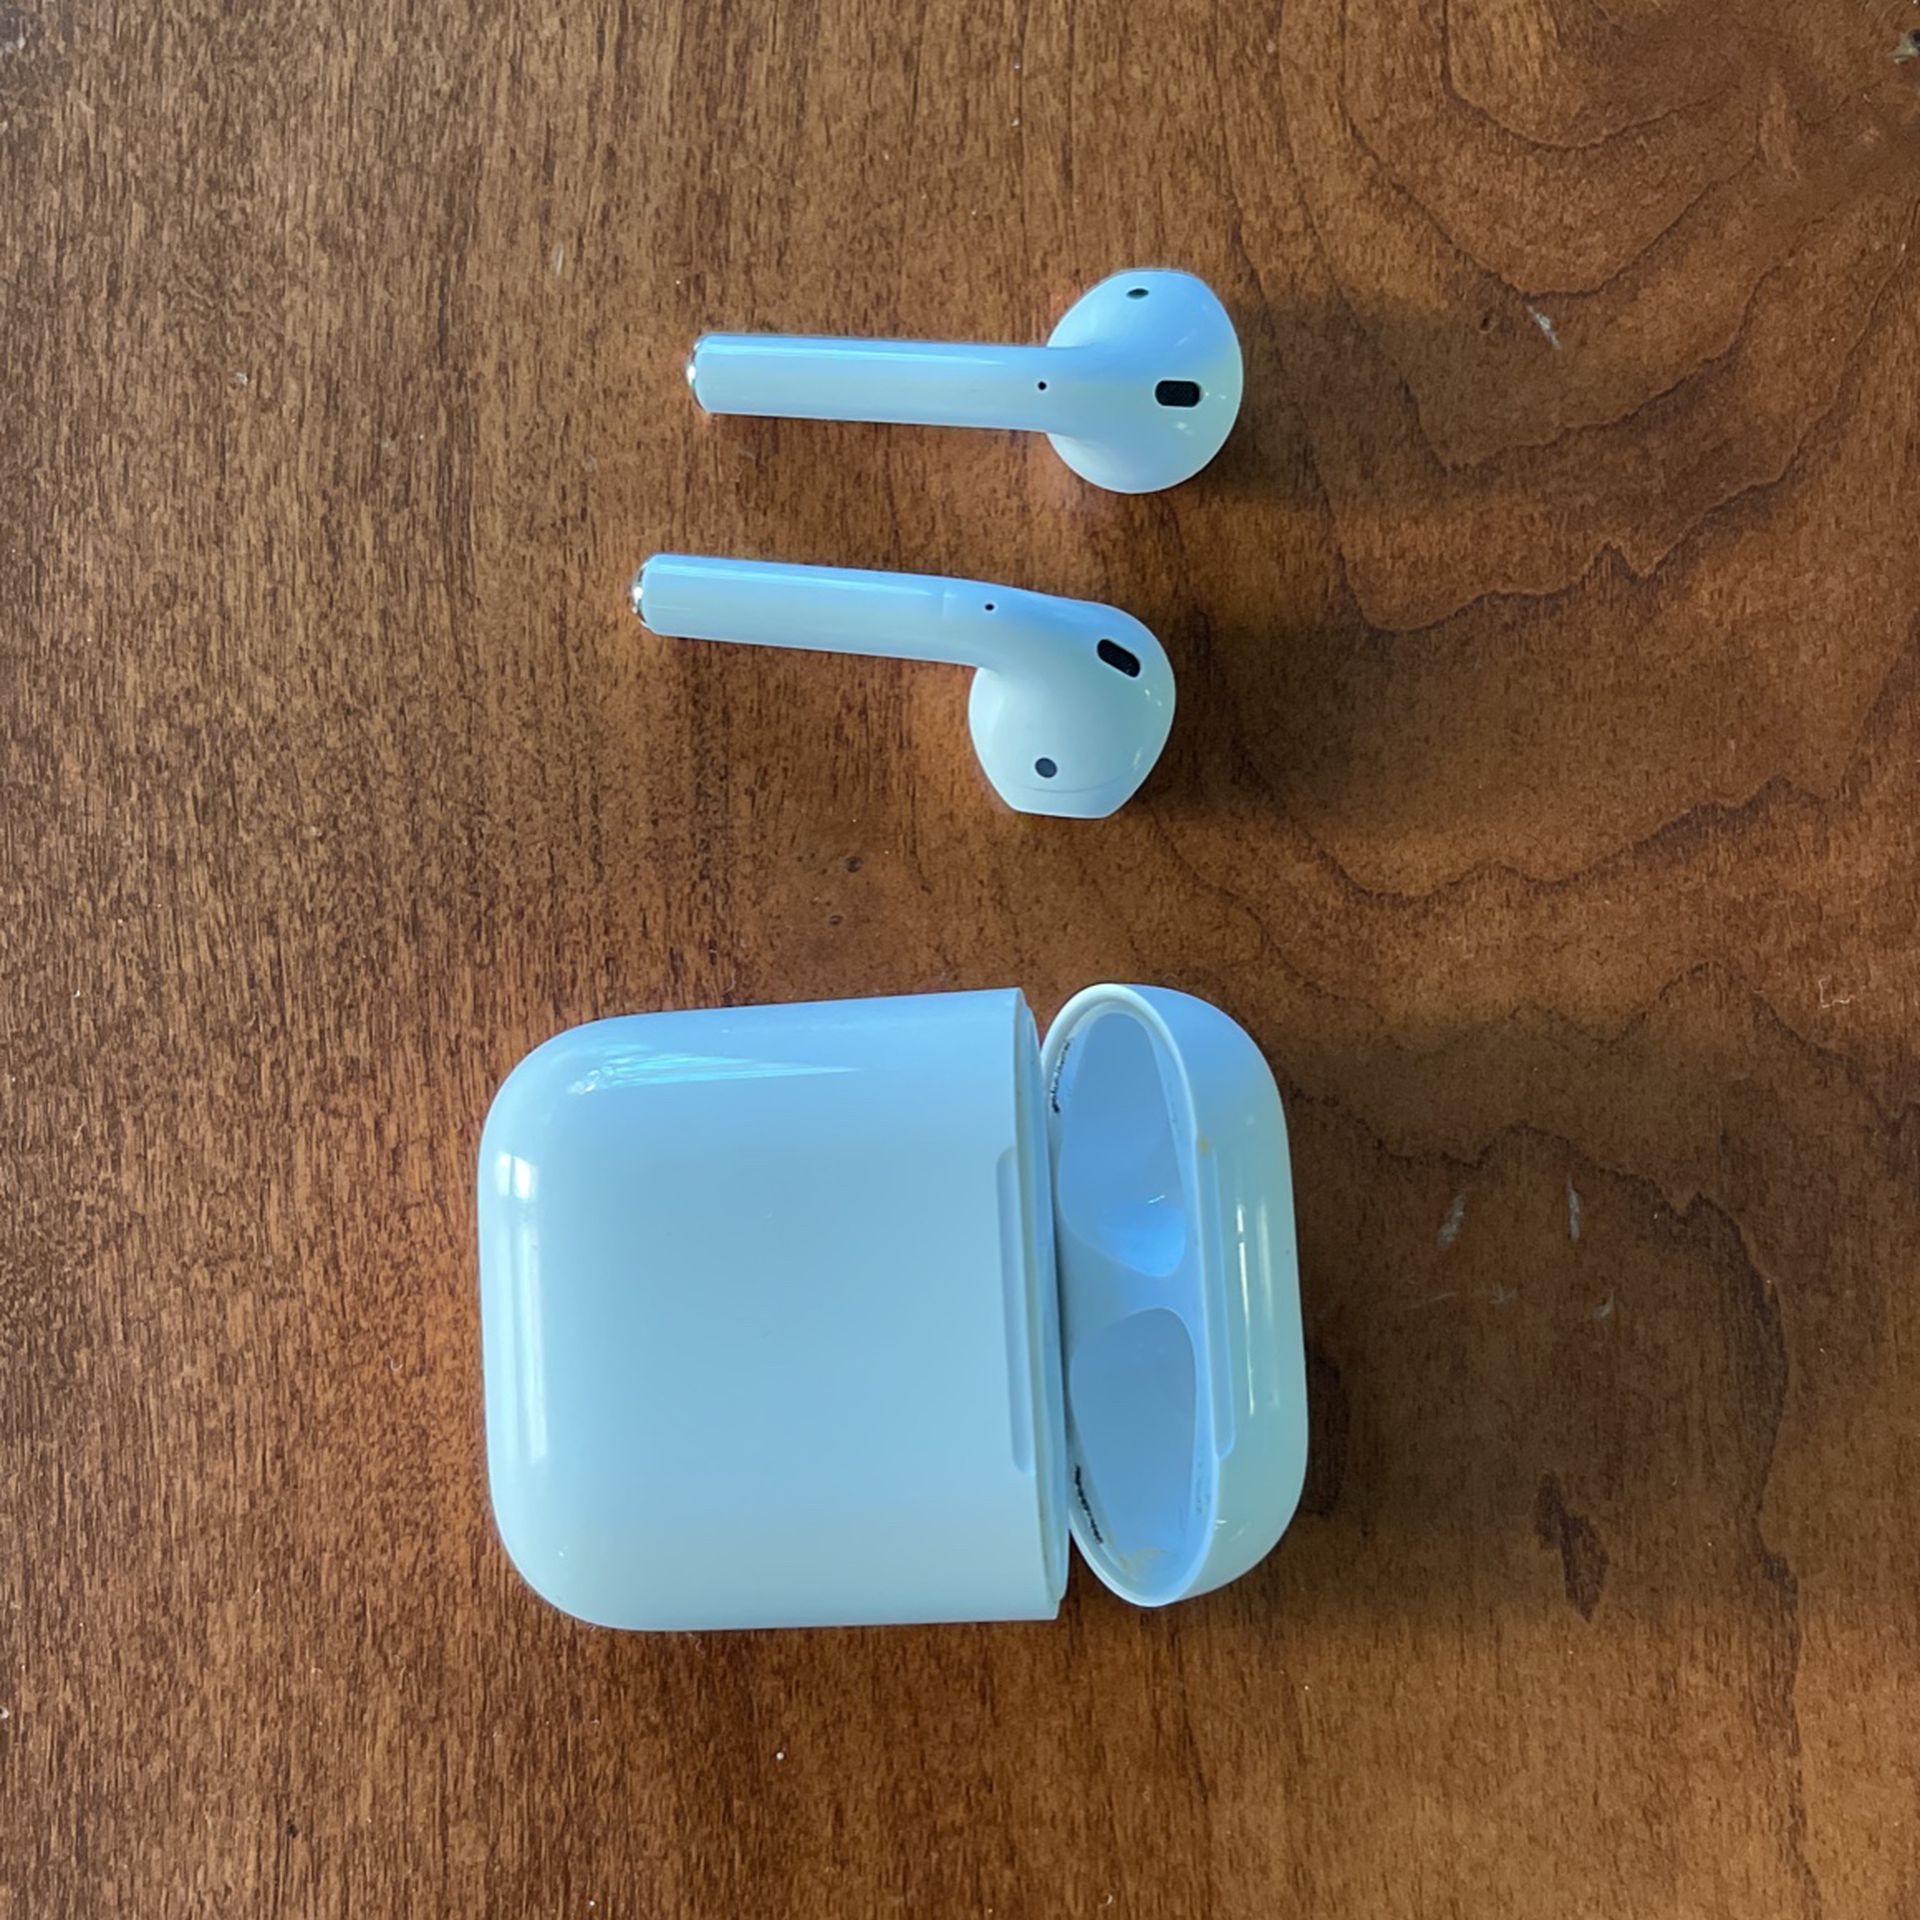 Apple AirPods First Generation Earbuds